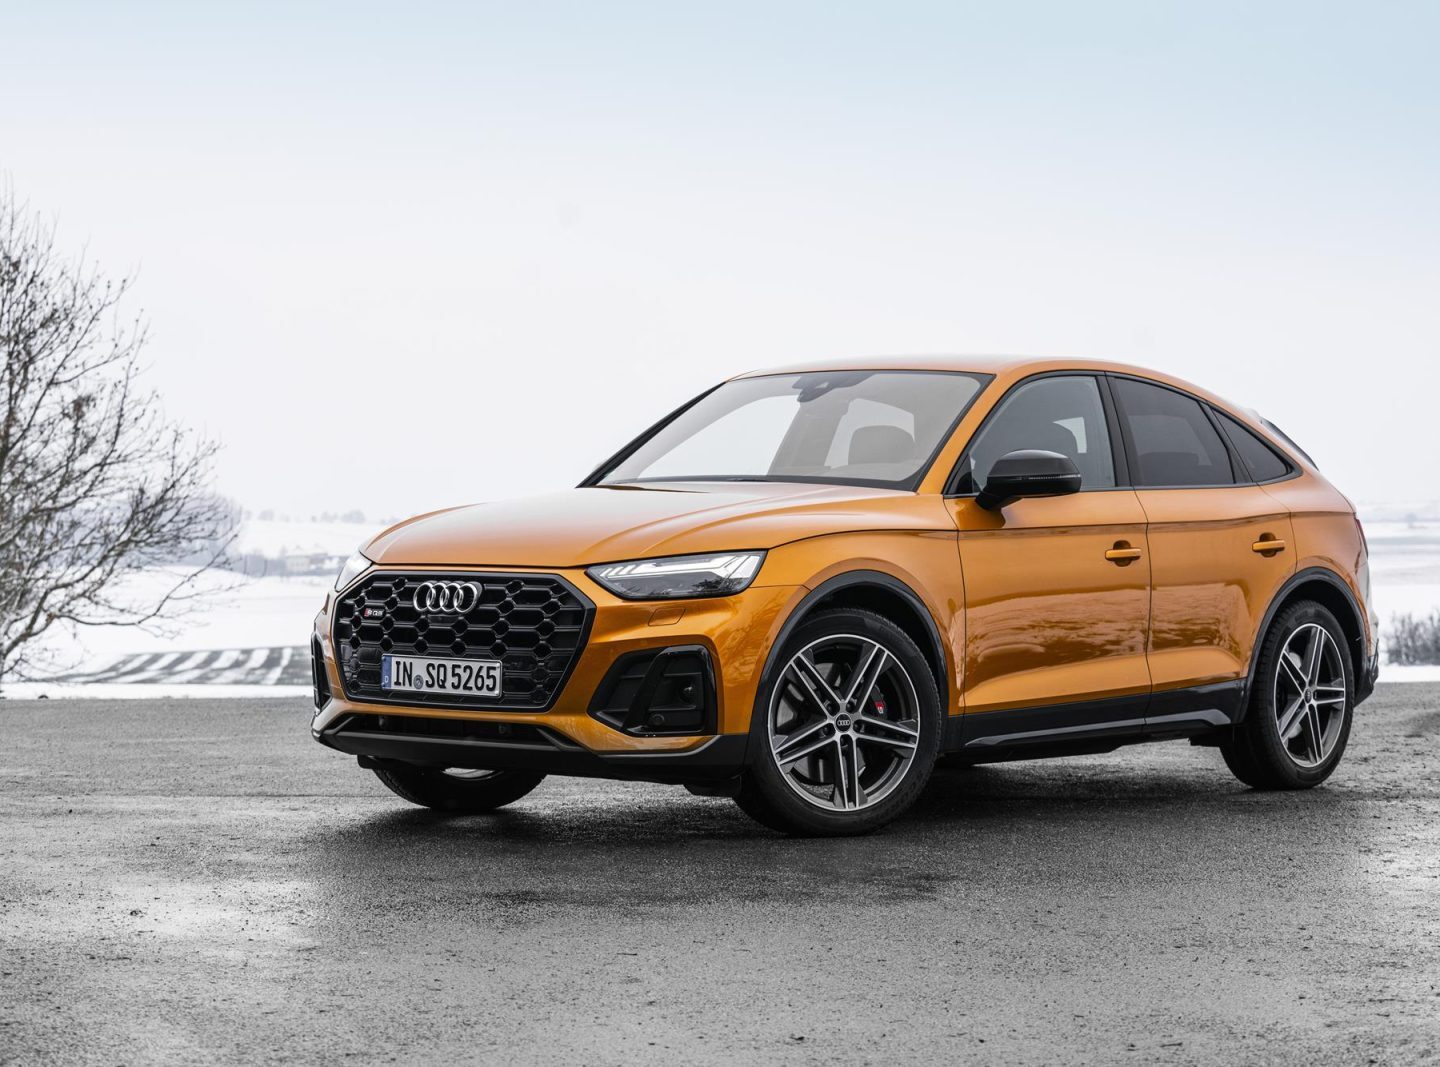 Review: 2021 Audi SQ5 Sportback is Lively, Stylish and Compact